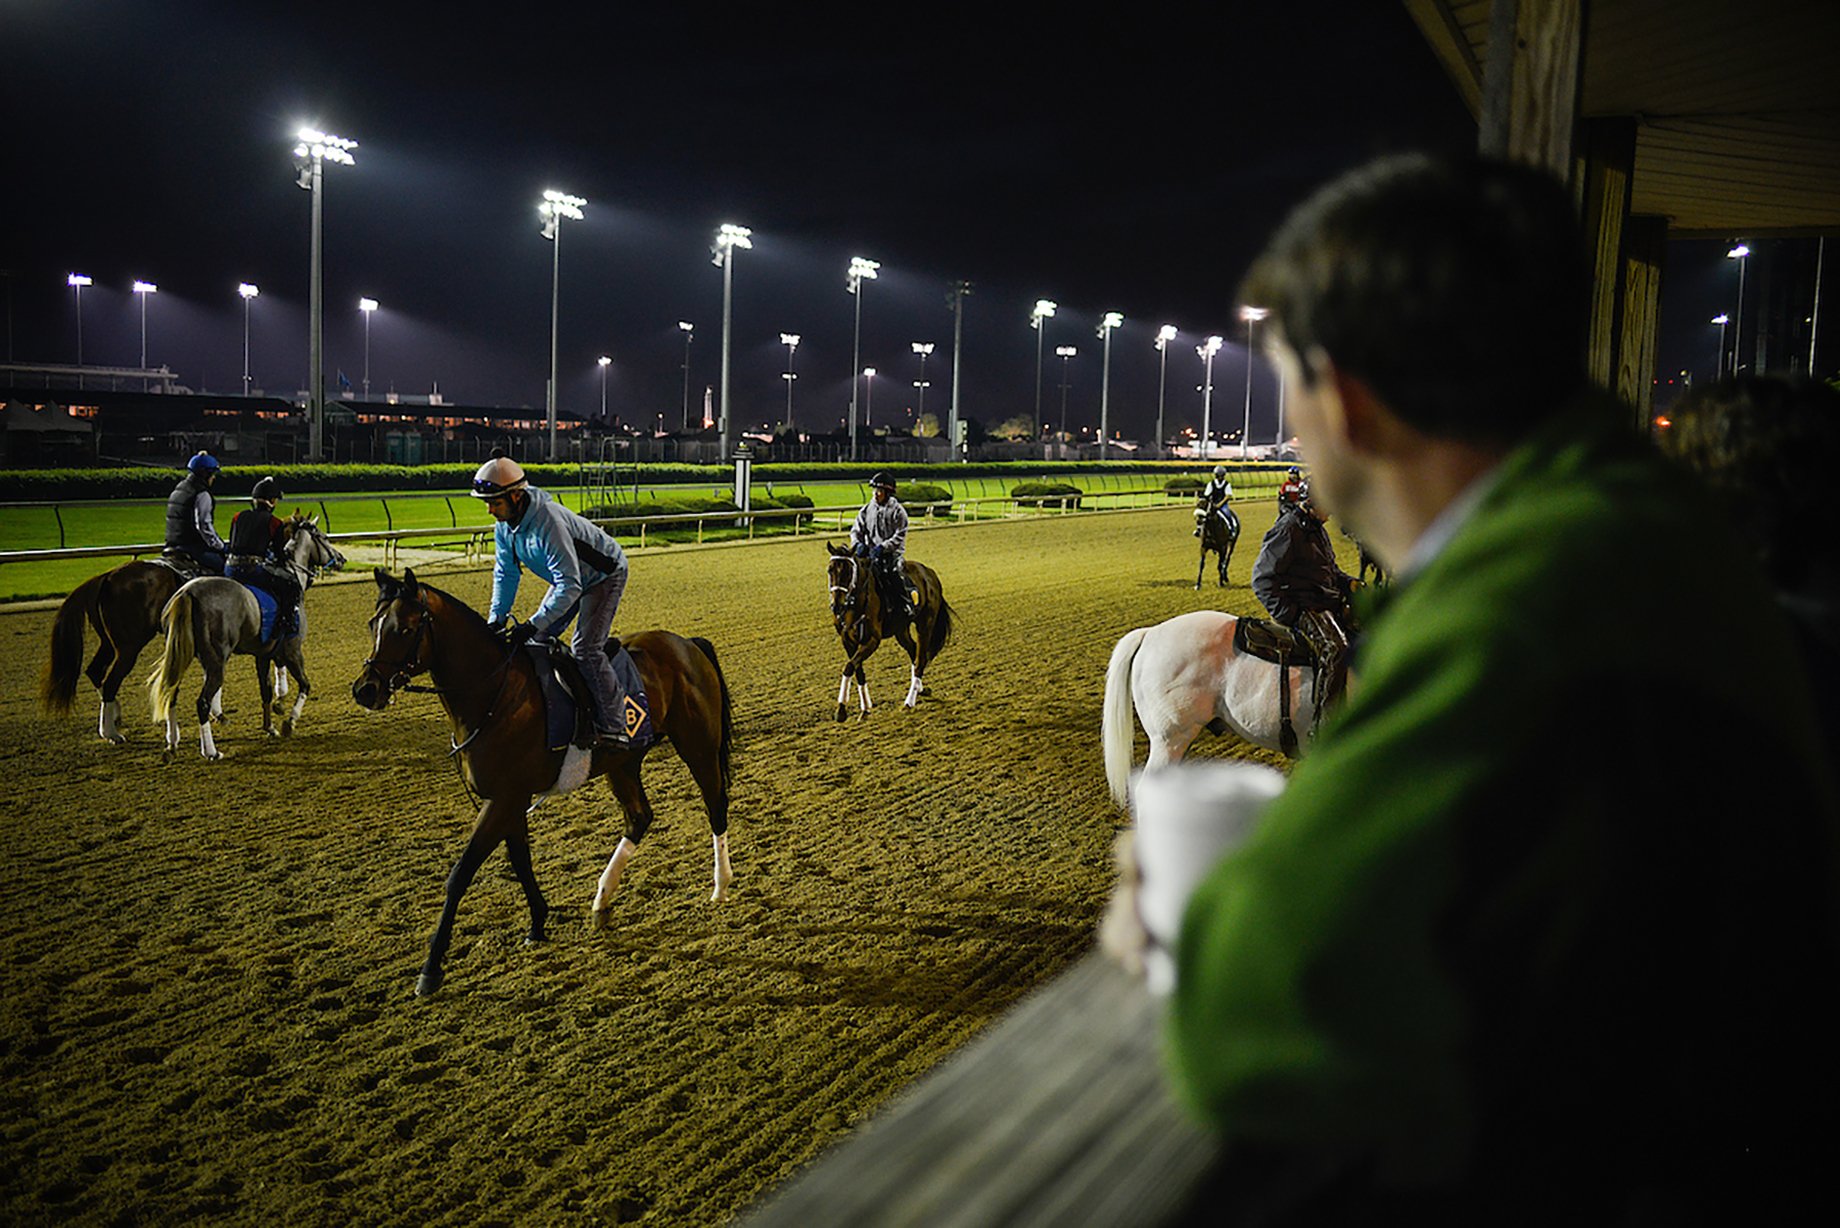 Exercise riders take this years derby horses onto the track for practice during the 141st running of the Kentucky Derby at Churchill Downs shot by William DeShazer